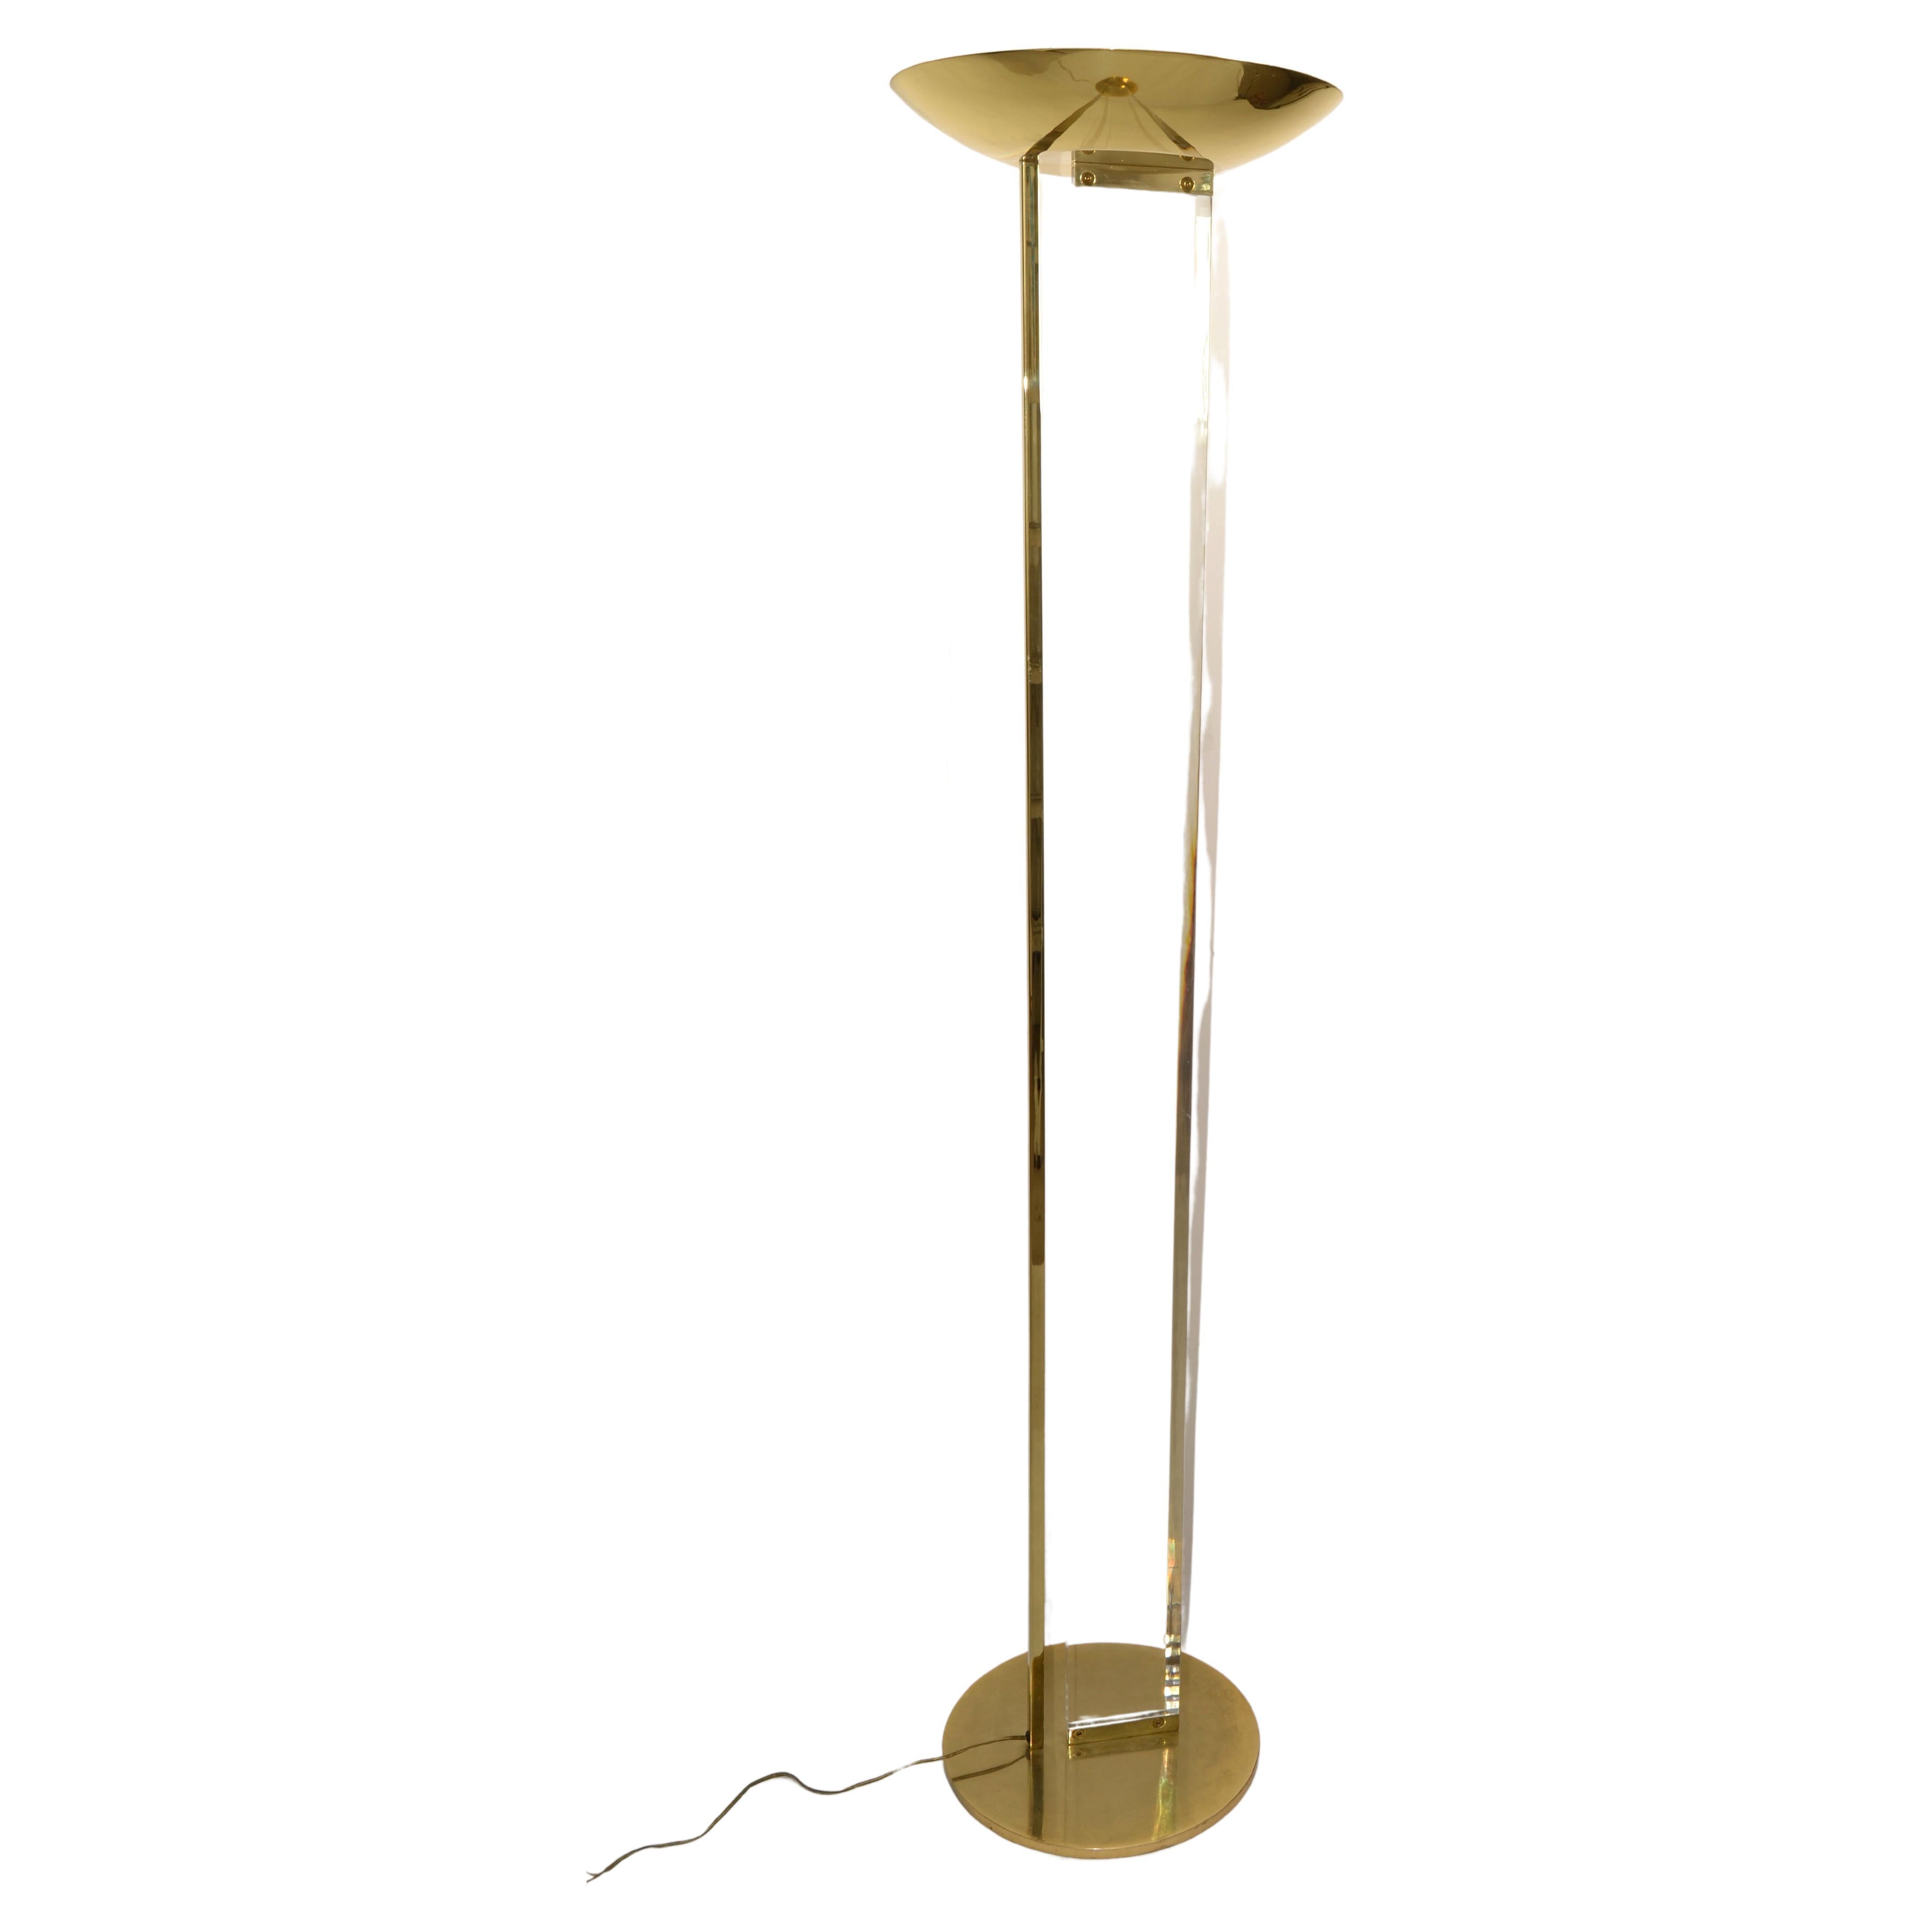 This elegant and classy floor lamp is made of brass and clear Lucite. The uplighter shade, foot and side of the pole are made of brass whereas the pole itself made of Lucite. 
Lovely detail is the angled cut in the Lucite all along the stem.
This